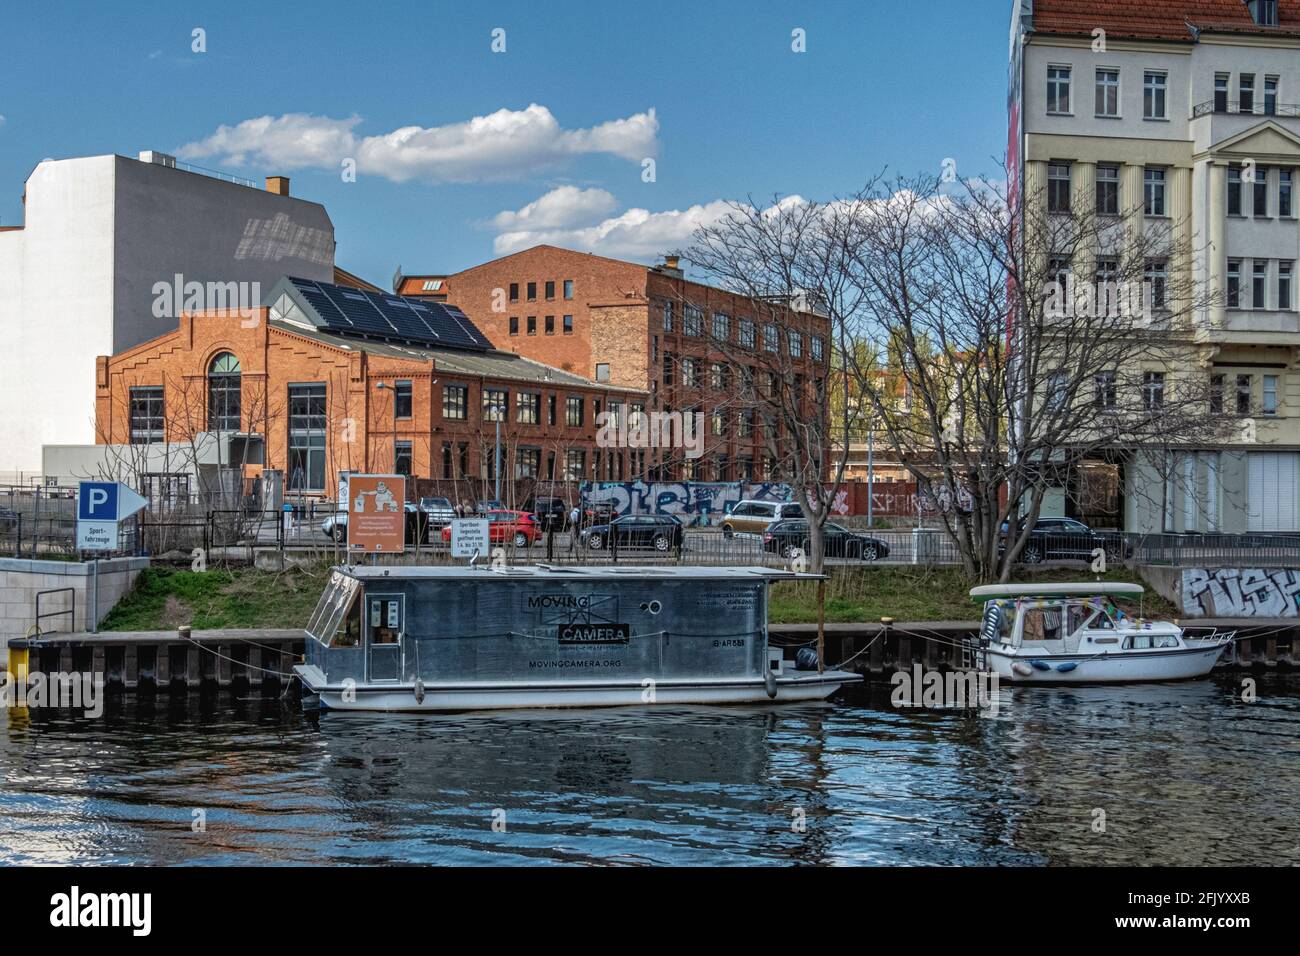 Moving Camera on Spree River,Mitte, Berlin The houseboat is a floating Camera Obscura and Polish Artist Maciej Markowicz takes pictures from the water Stock Photo